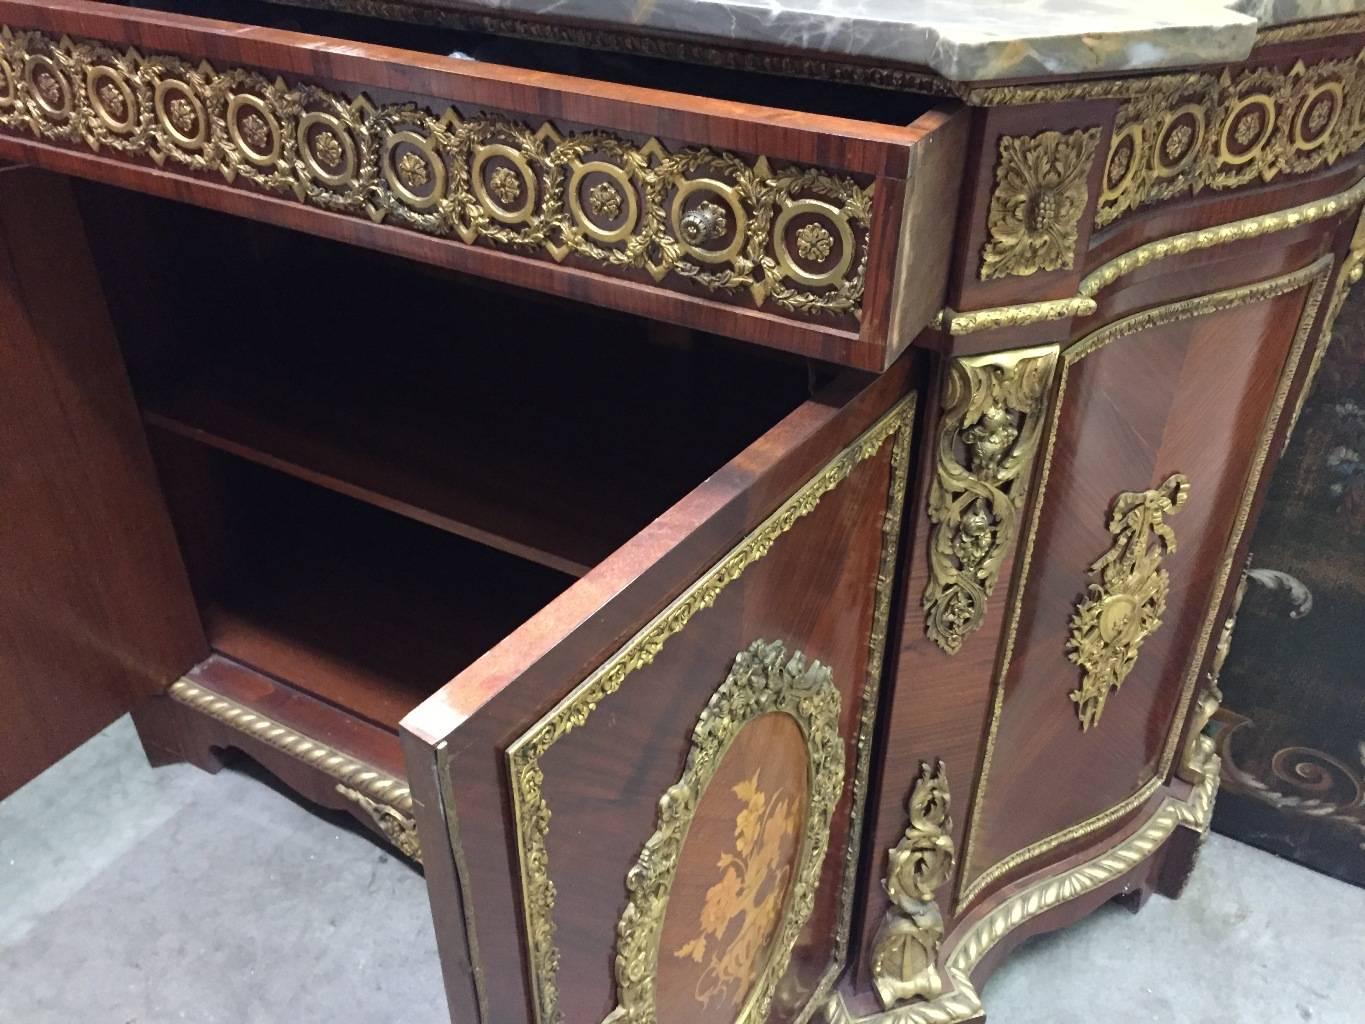 20th Century French Ormolu-Mounted Marquetry Credenza